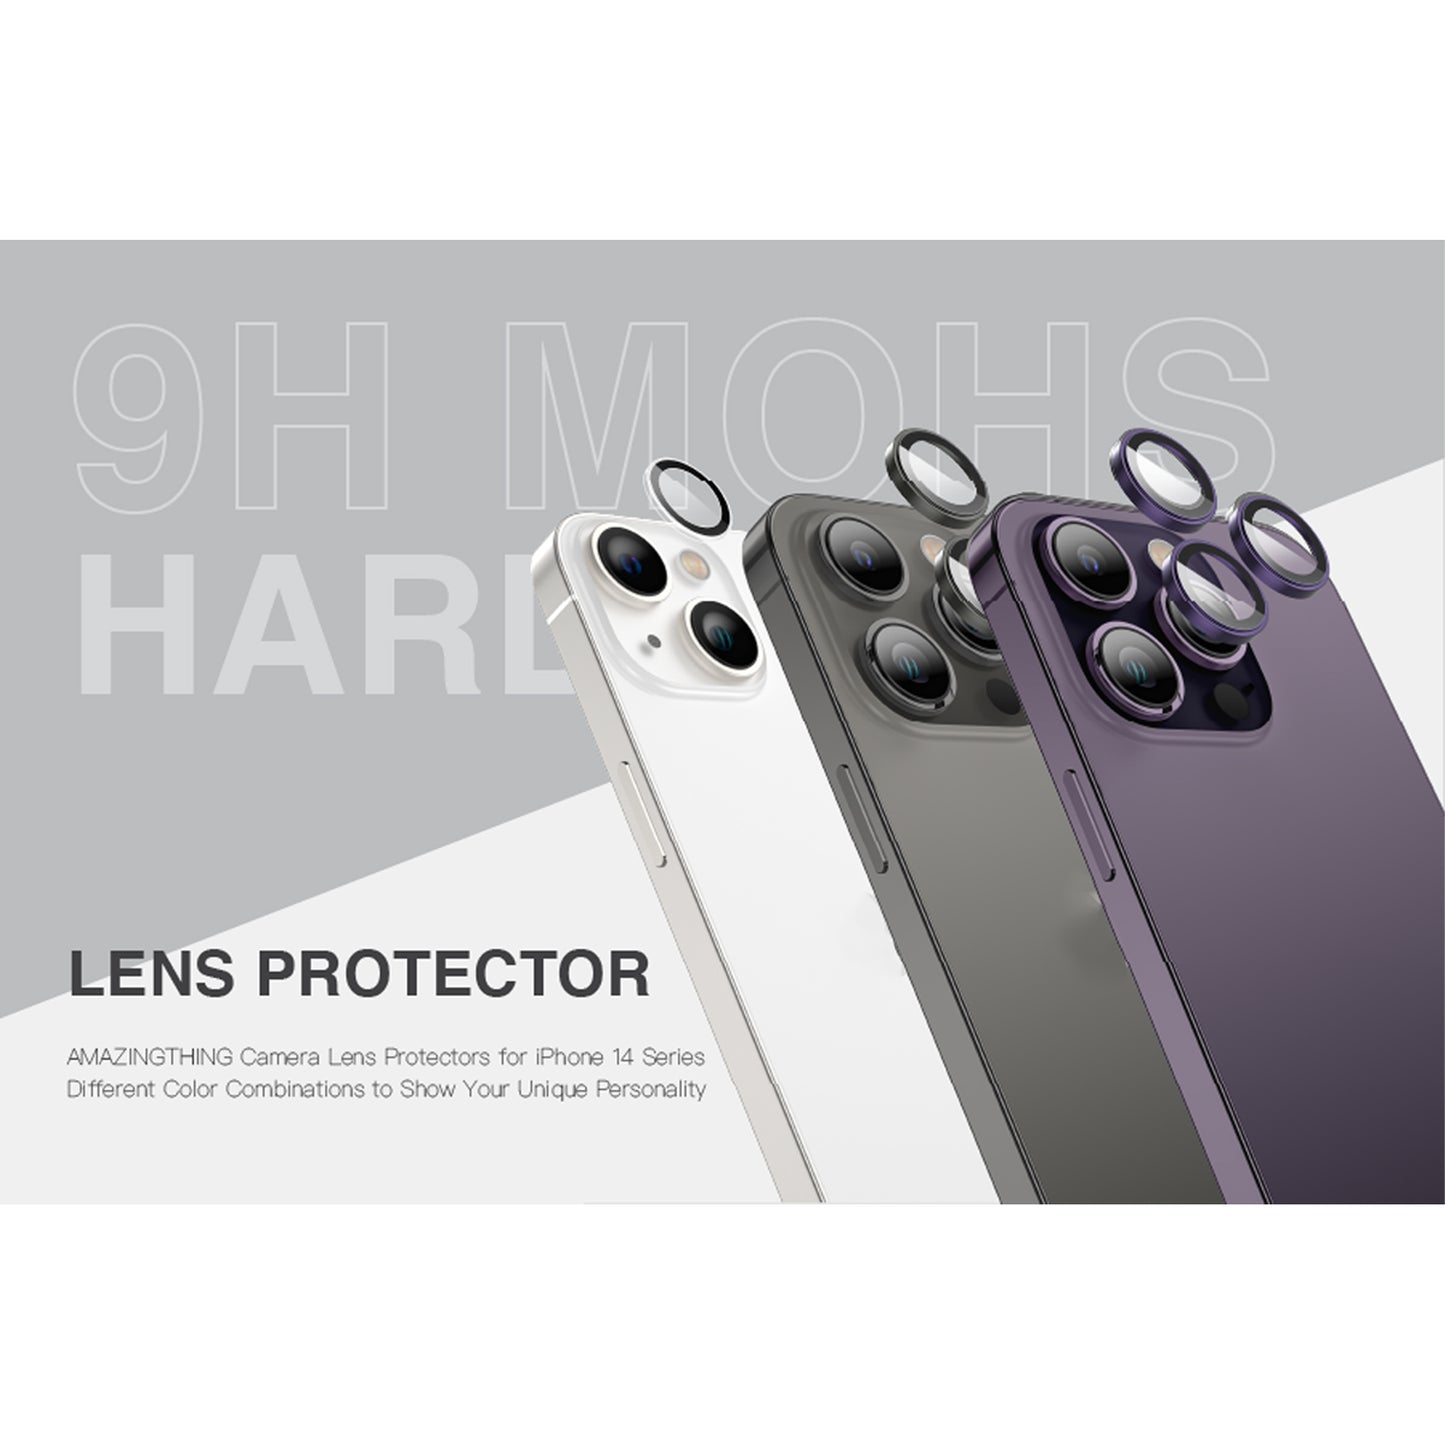 Amazingthing Lens Protector for iPhone 14 Pro - 14 Pro Max - Gray (Barcode: 4892878076074 )